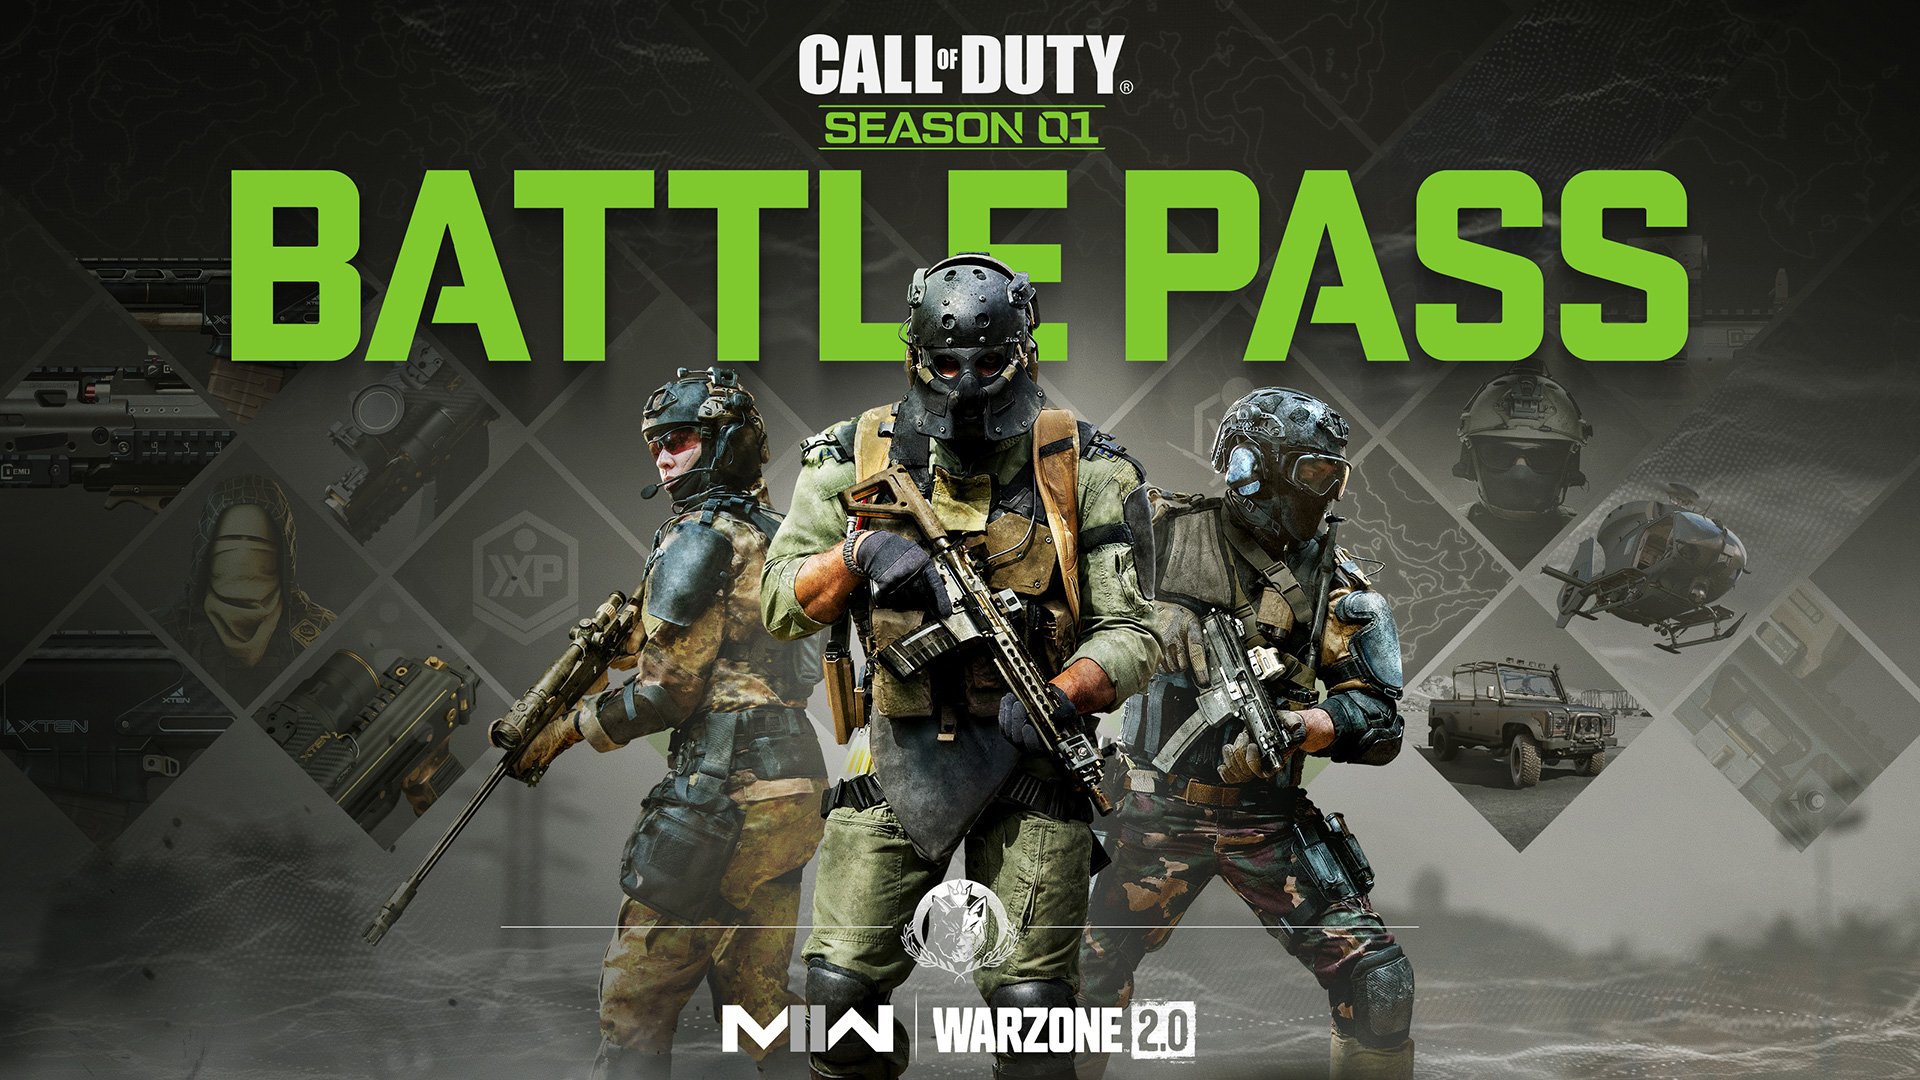 Introducing a New Battle Pass System in Call of Duty®: Modern Warfare® II and Call of Duty®: WarzoneTM 2.0 Season plus Bundle Highlights